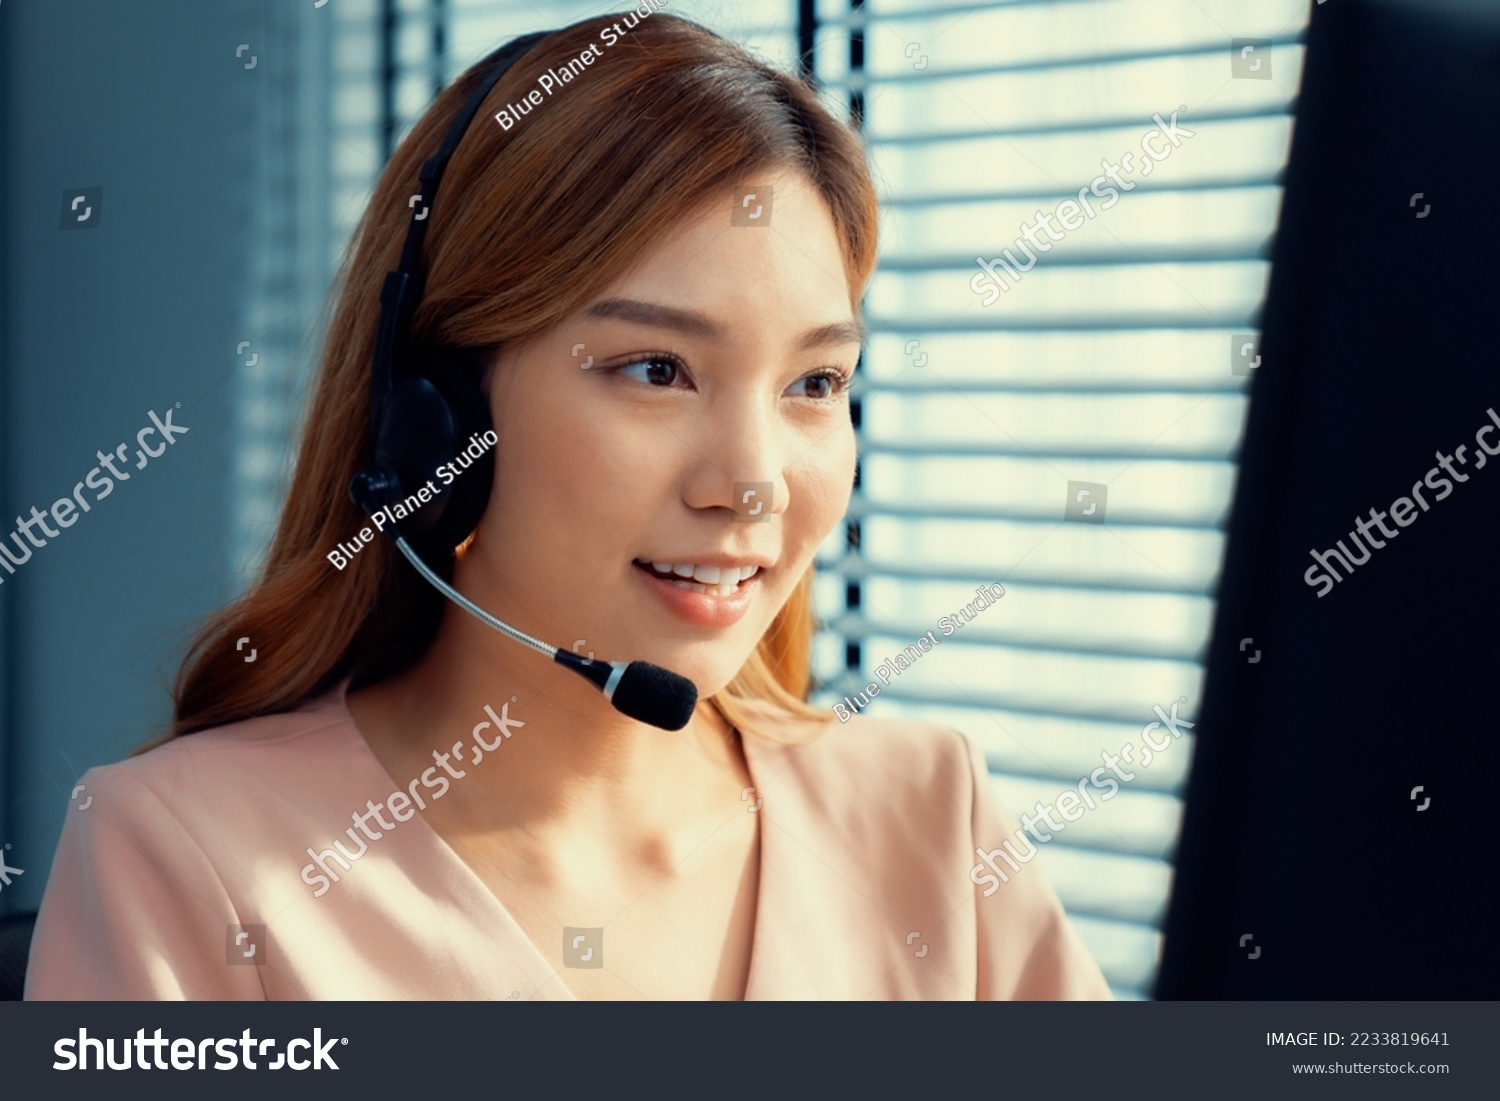 Competent female operator working on computer and while talking with clients. Concept relevant to both call centers and customer service offices. #2233819641